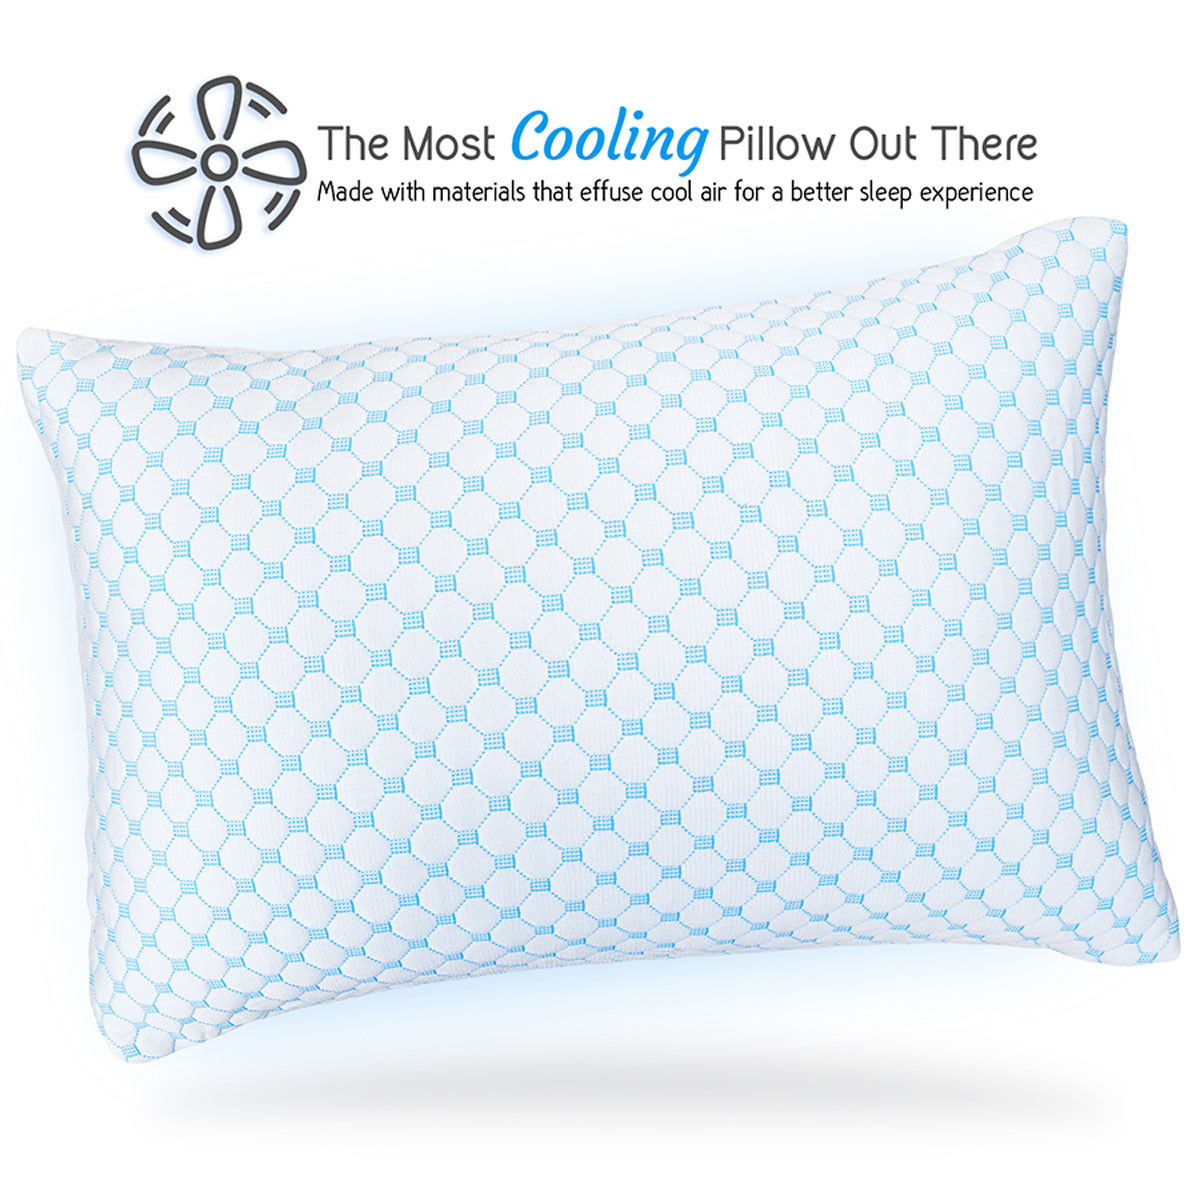 How does the Clara Clark Reversible Cooling pillow create a cozy environment?